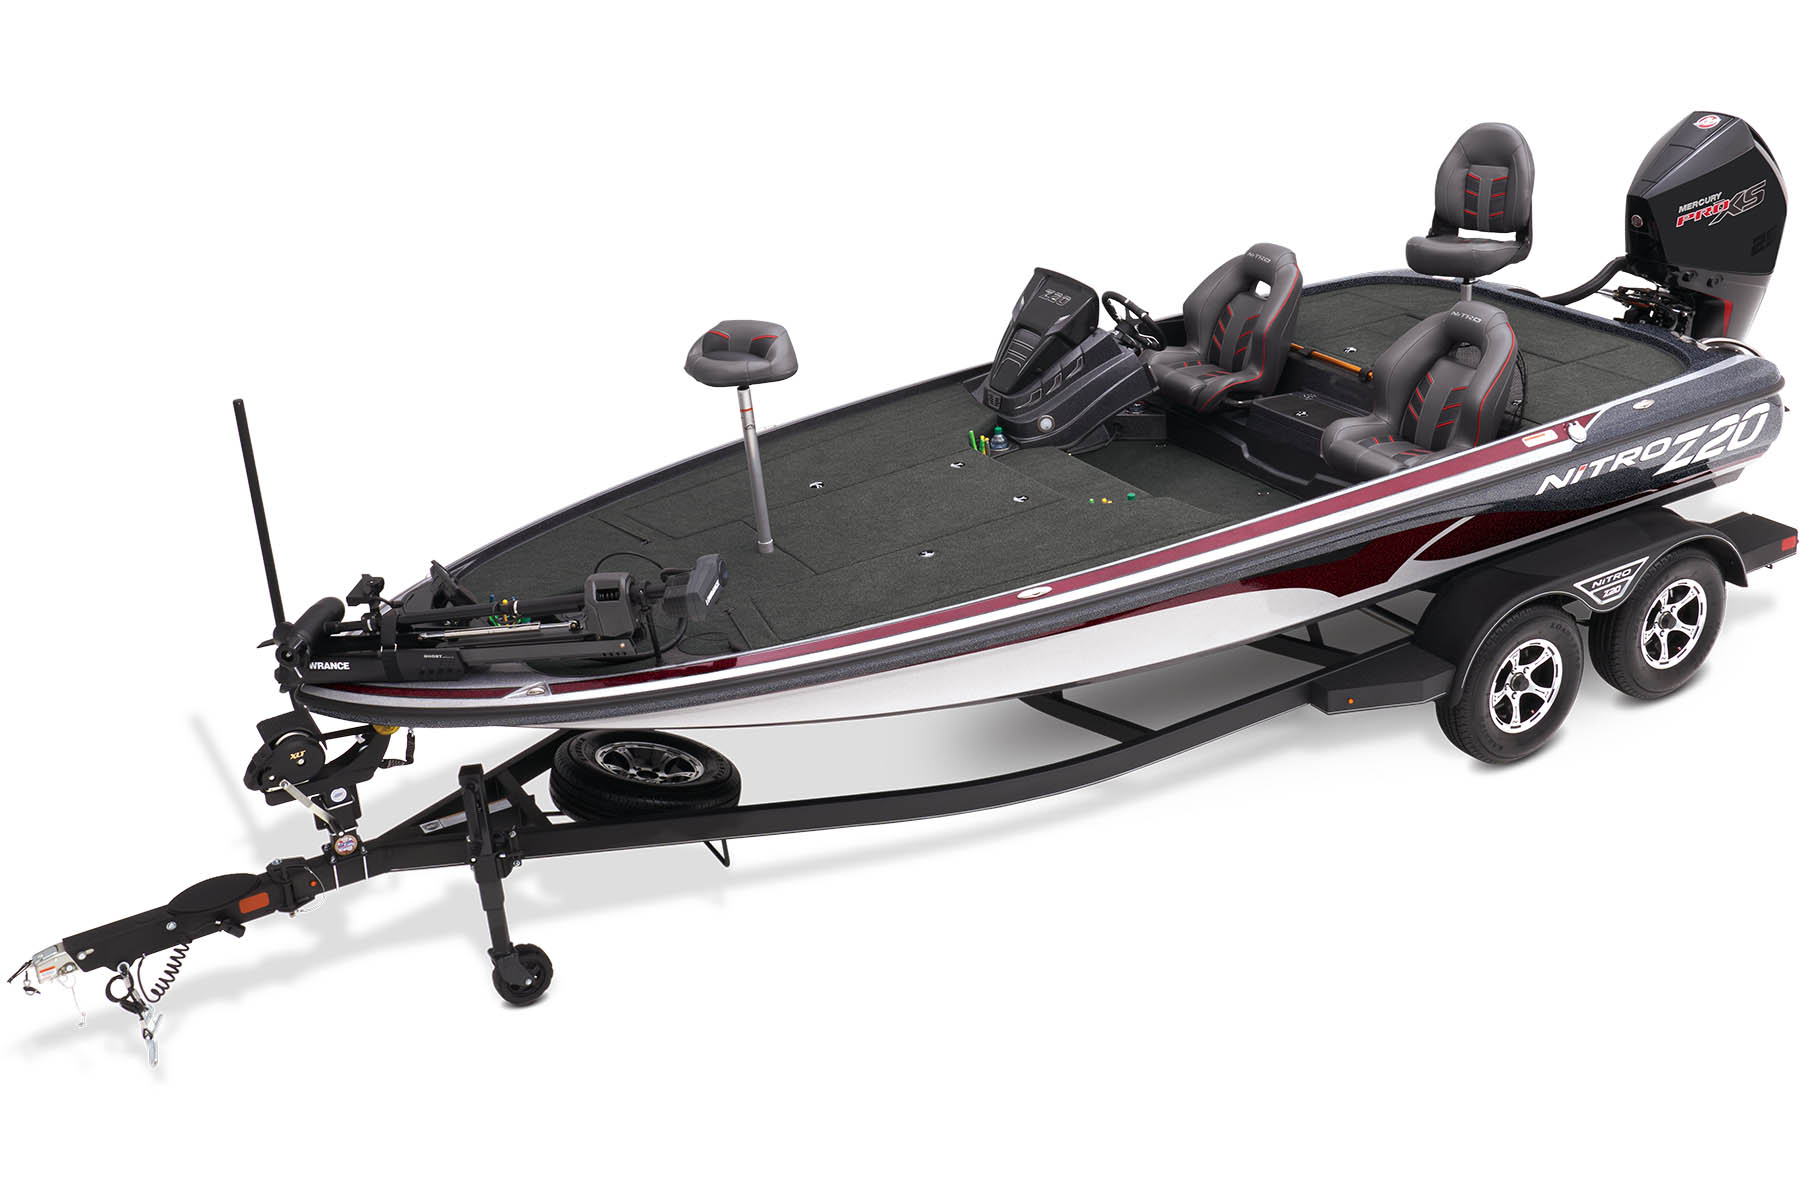 NITRO Build a Boat - Build and Price Bass Boats